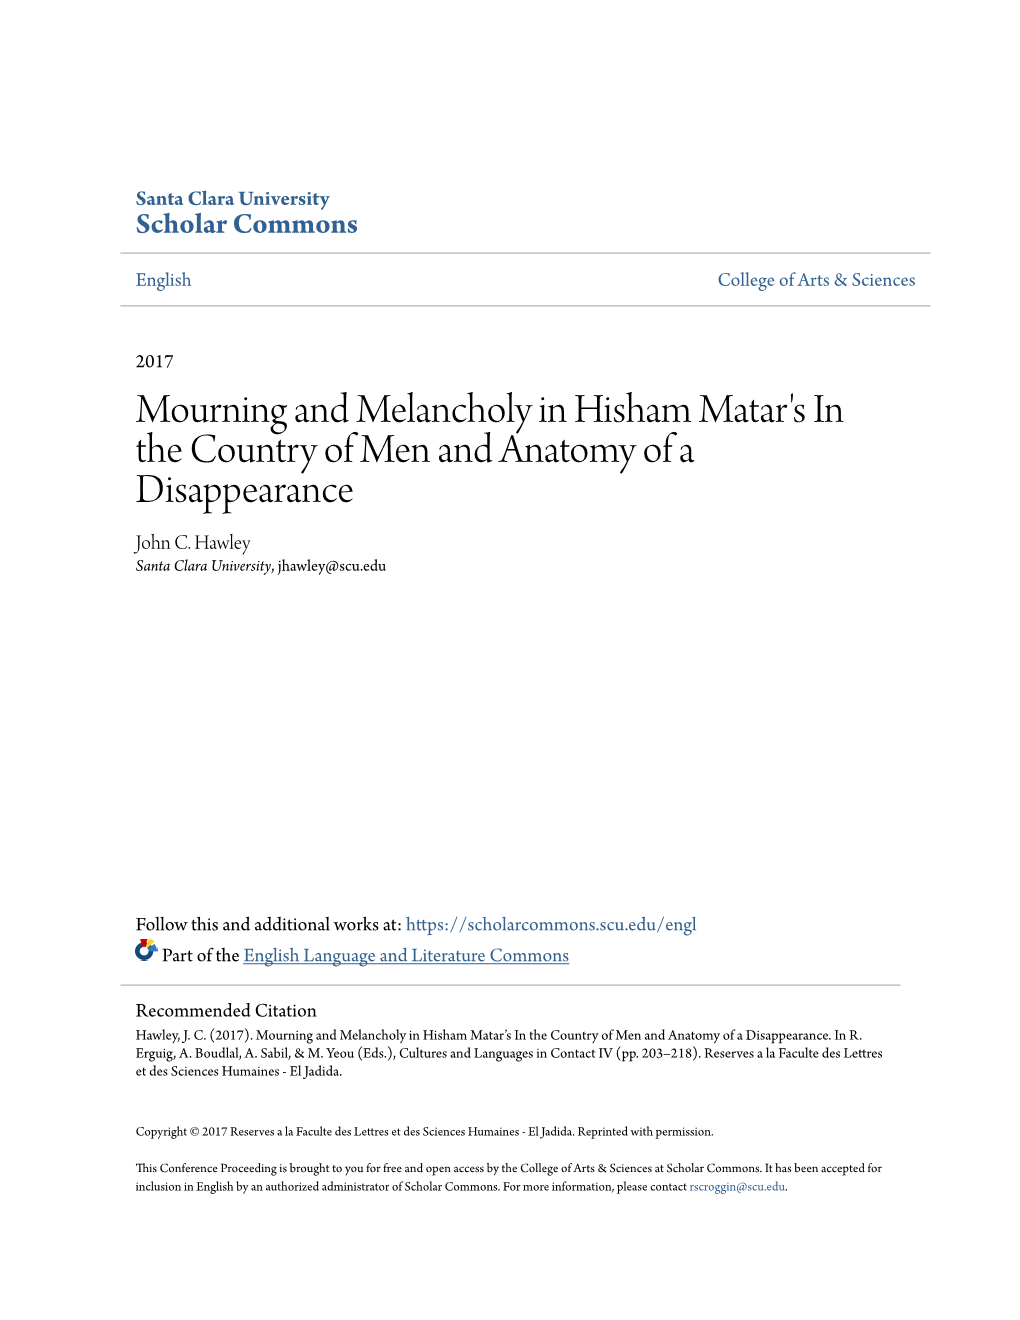 Mourning and Melancholy in Hisham Matar's in the Country of Men and Anatomy of a Disappearance John C